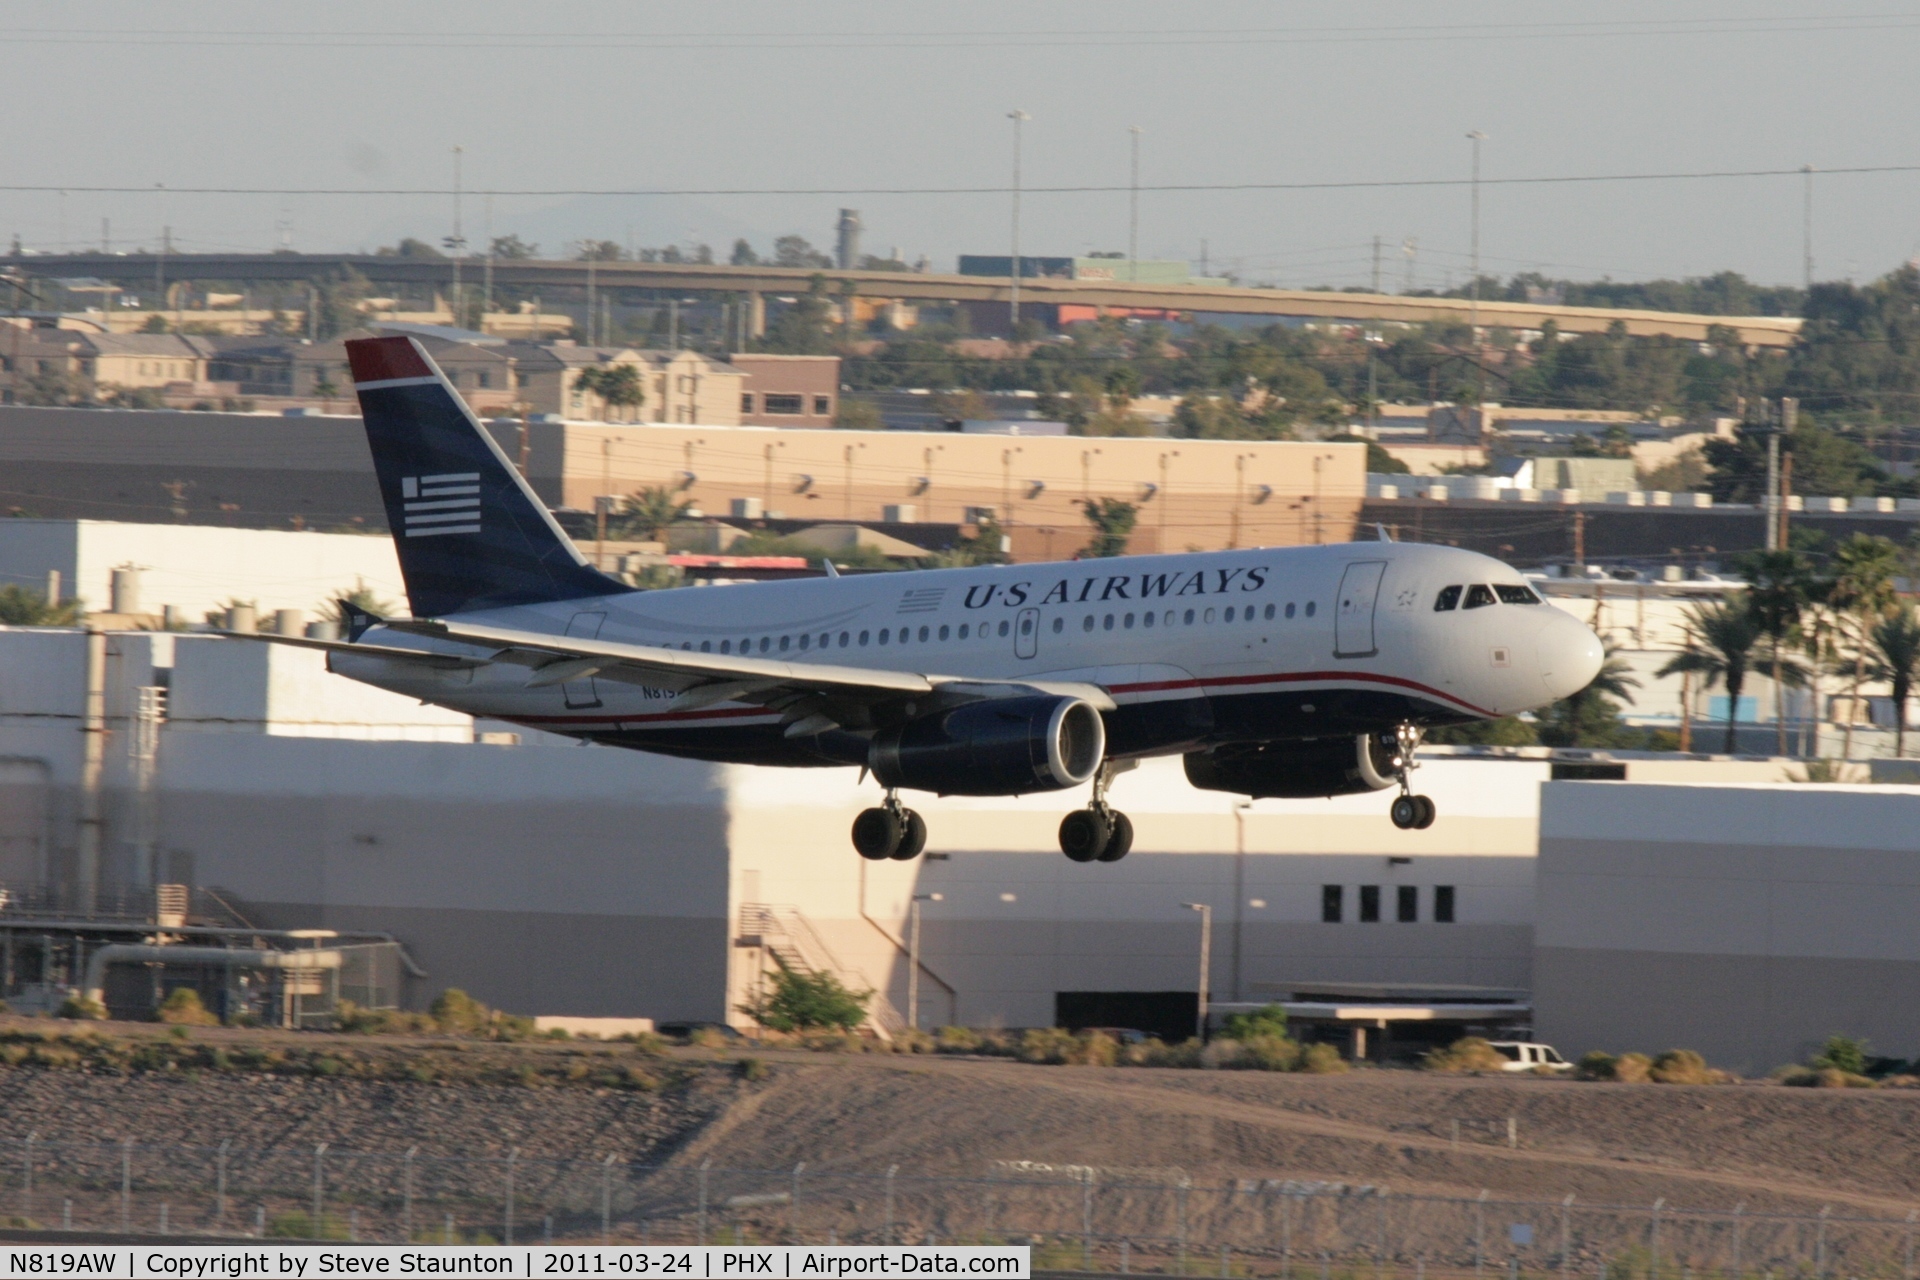 N819AW, 2000 Airbus A319-132 C/N 1395, Taken at Phoenix Sky Harbor Airport, in March 2011 whilst on an Aeroprint Aviation tour